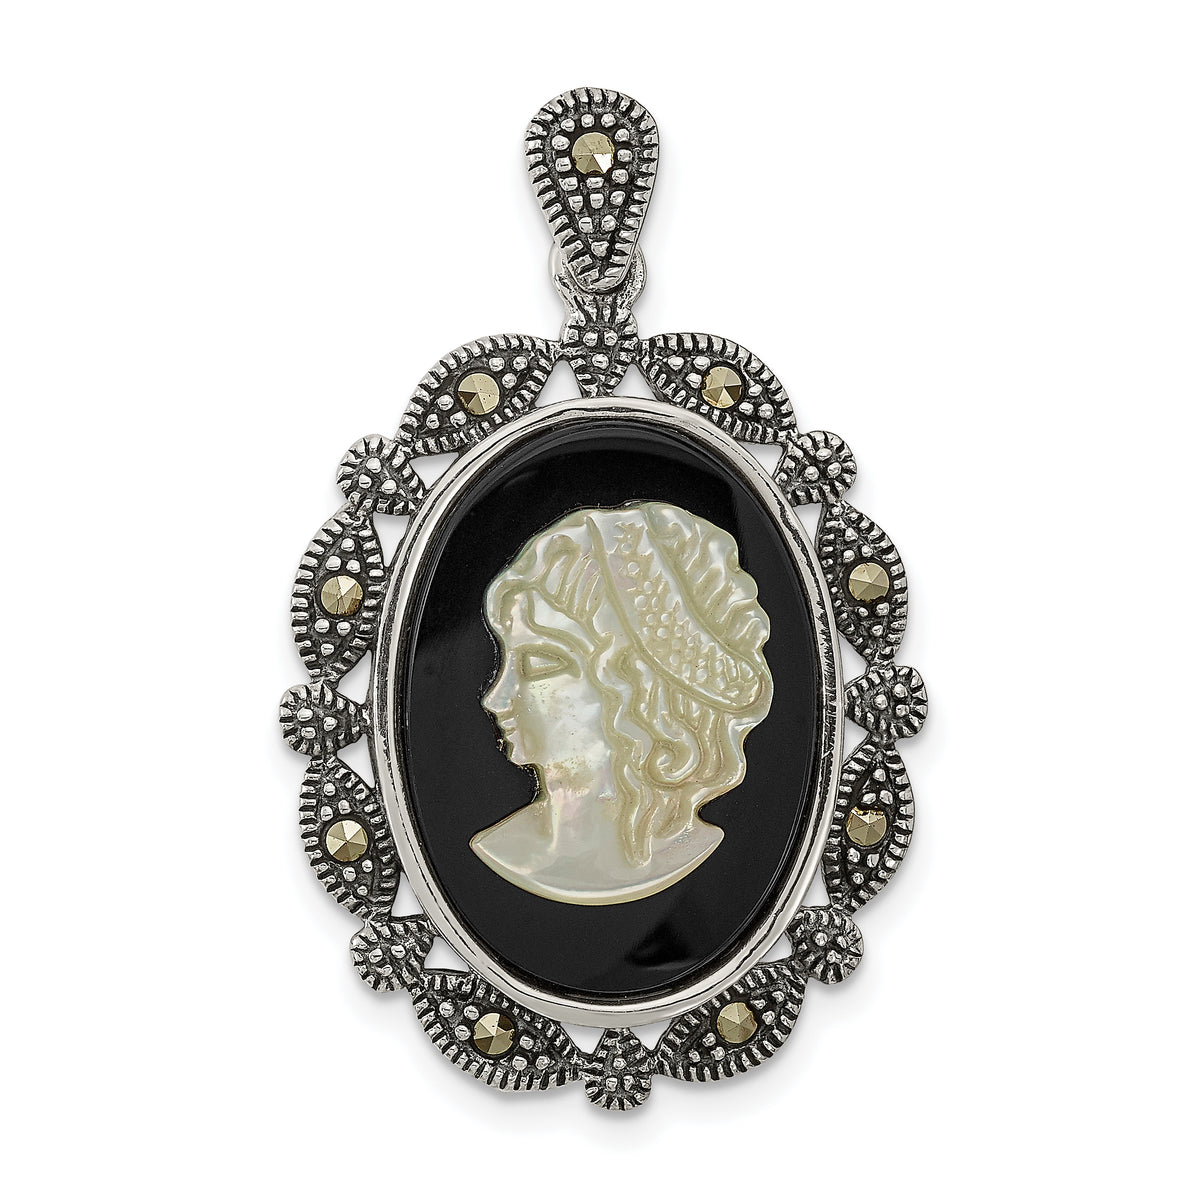 Sterling Silver Antiqued Marcasite Black Agate & MOP White Cameo Pendant